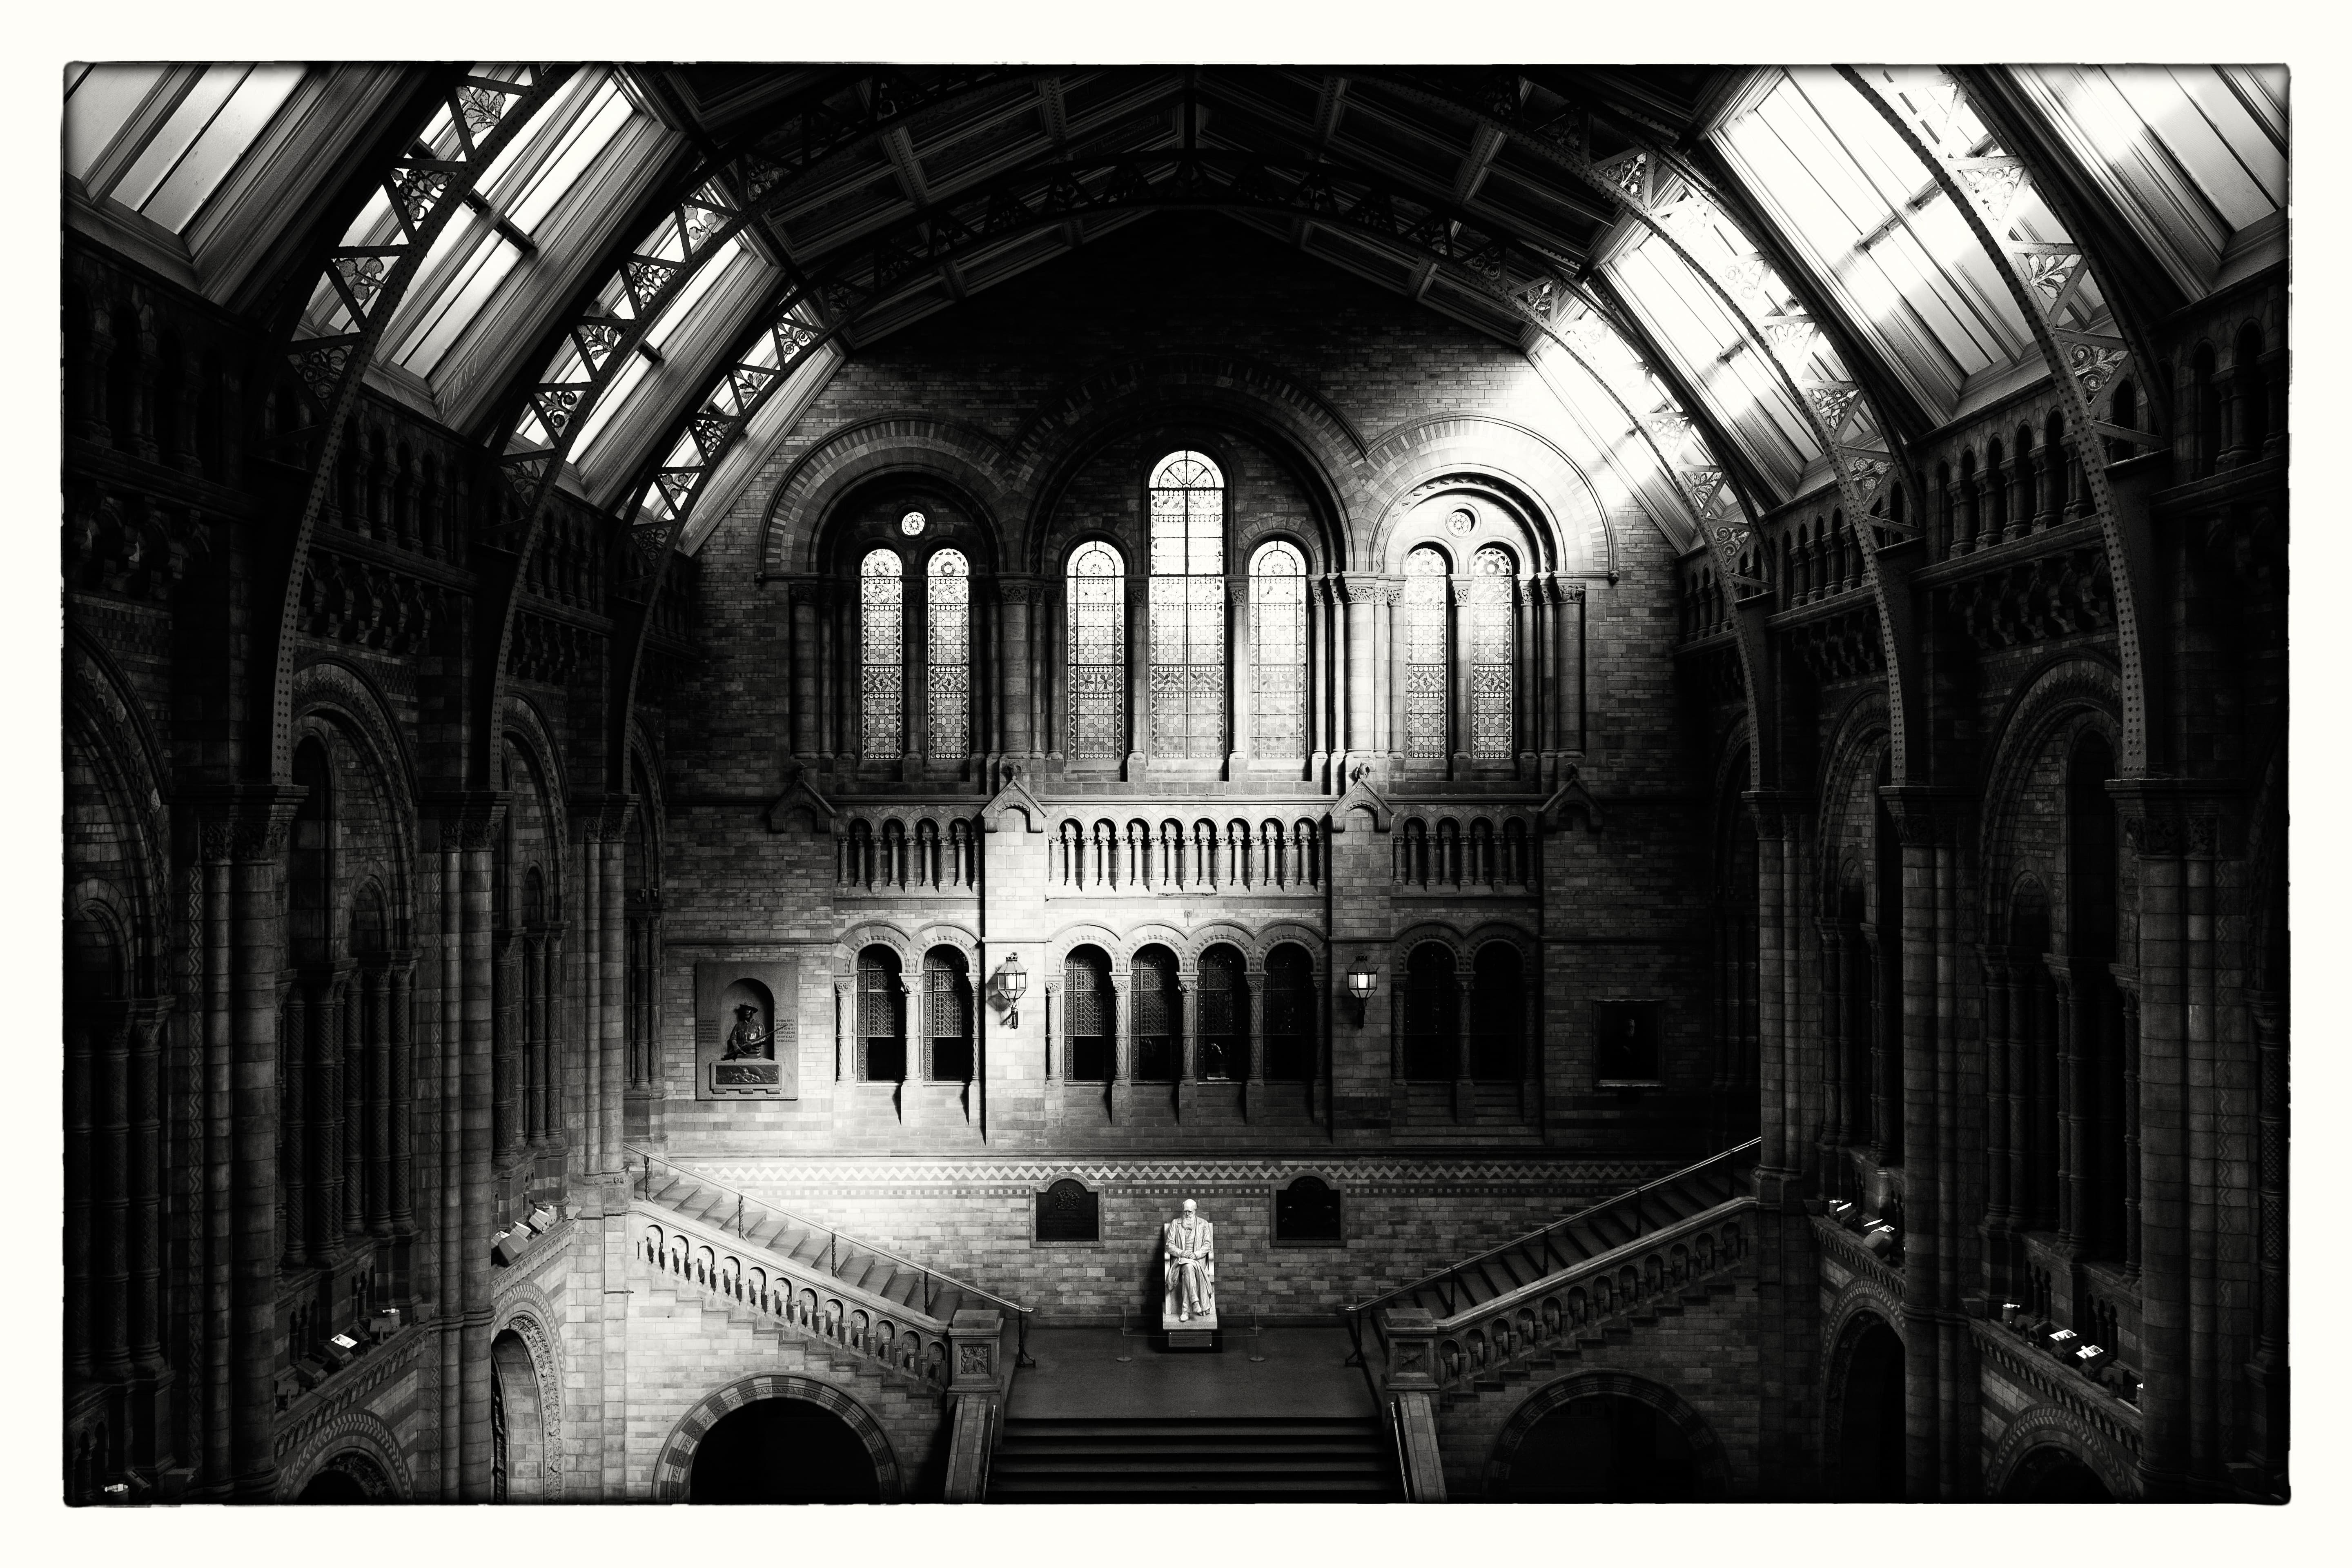 Natural History Museum, London. Sepia tone was used to warm up this architectural shot. Canon EOS 5D Mk III, 24-70mm, 1/80sec @ f/8, ISO 100